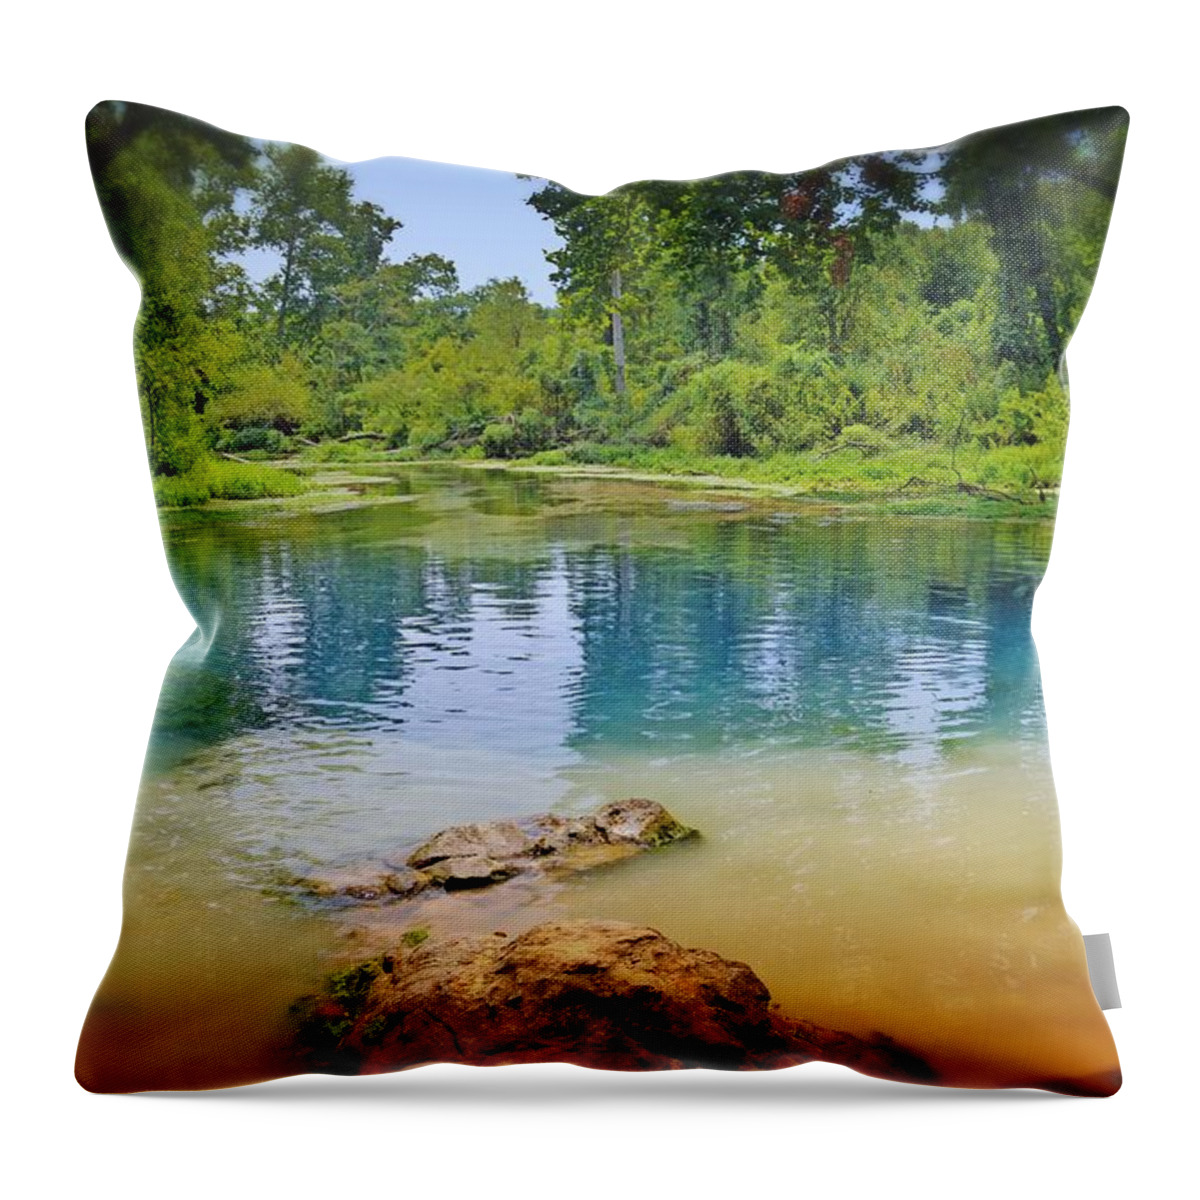 Boze Mill Spring Throw Pillow featuring the photograph Boze Mill Spring by Marty Koch